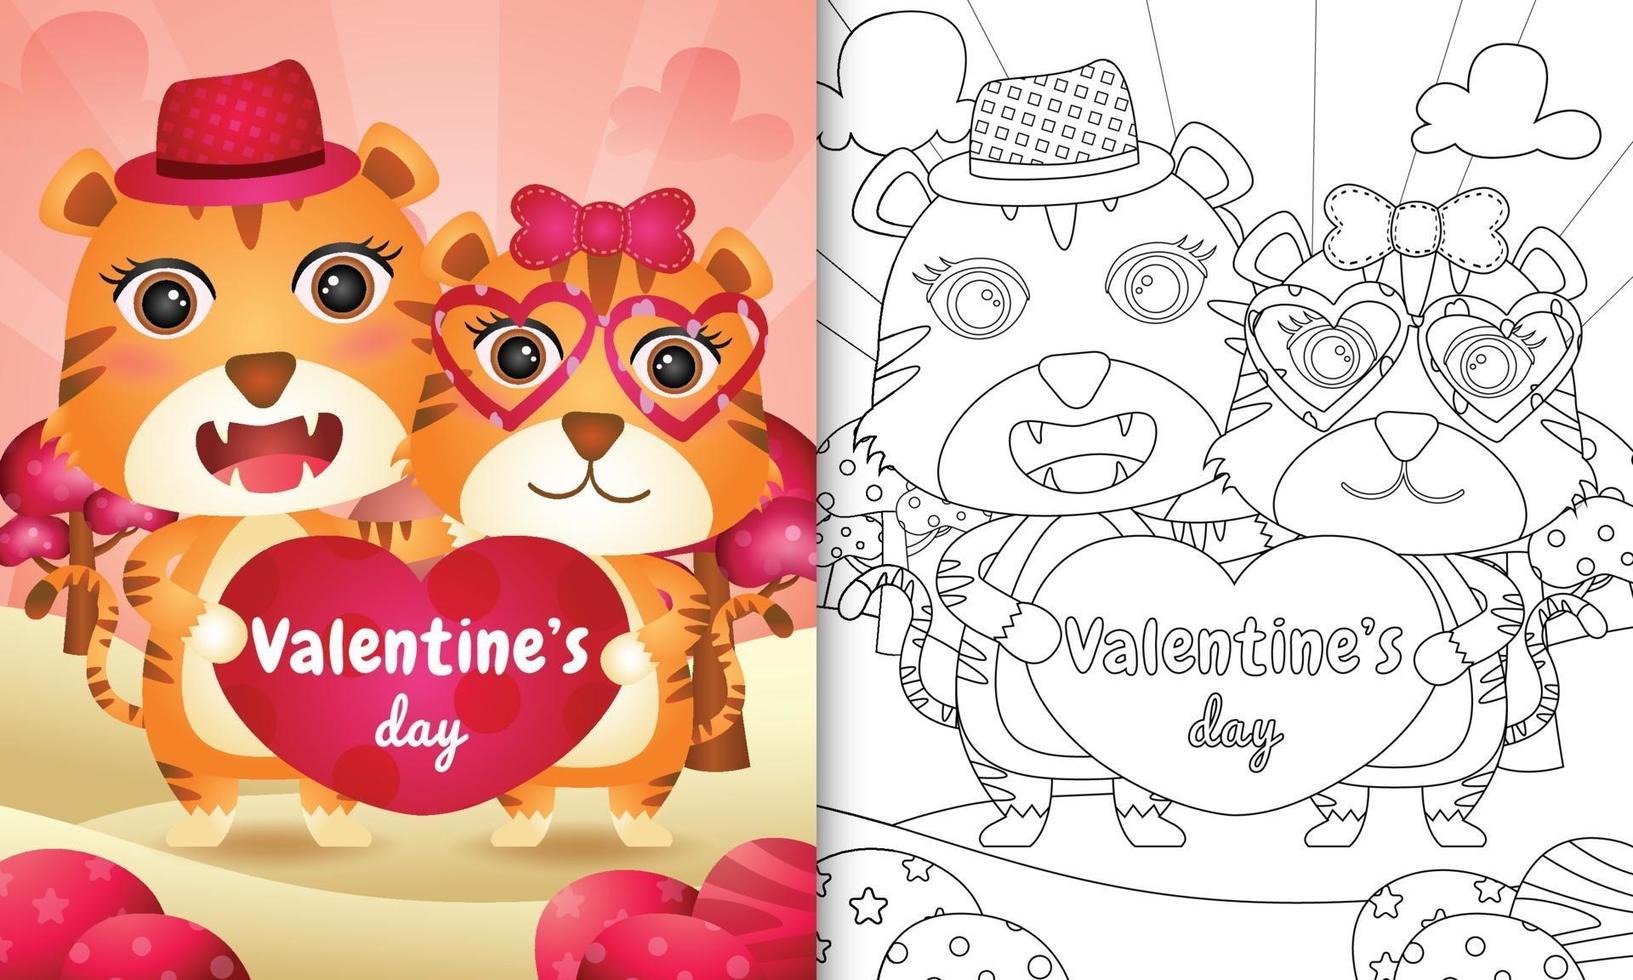 coloring book for kids with Cute valentine's day tiger couple illustrated vector